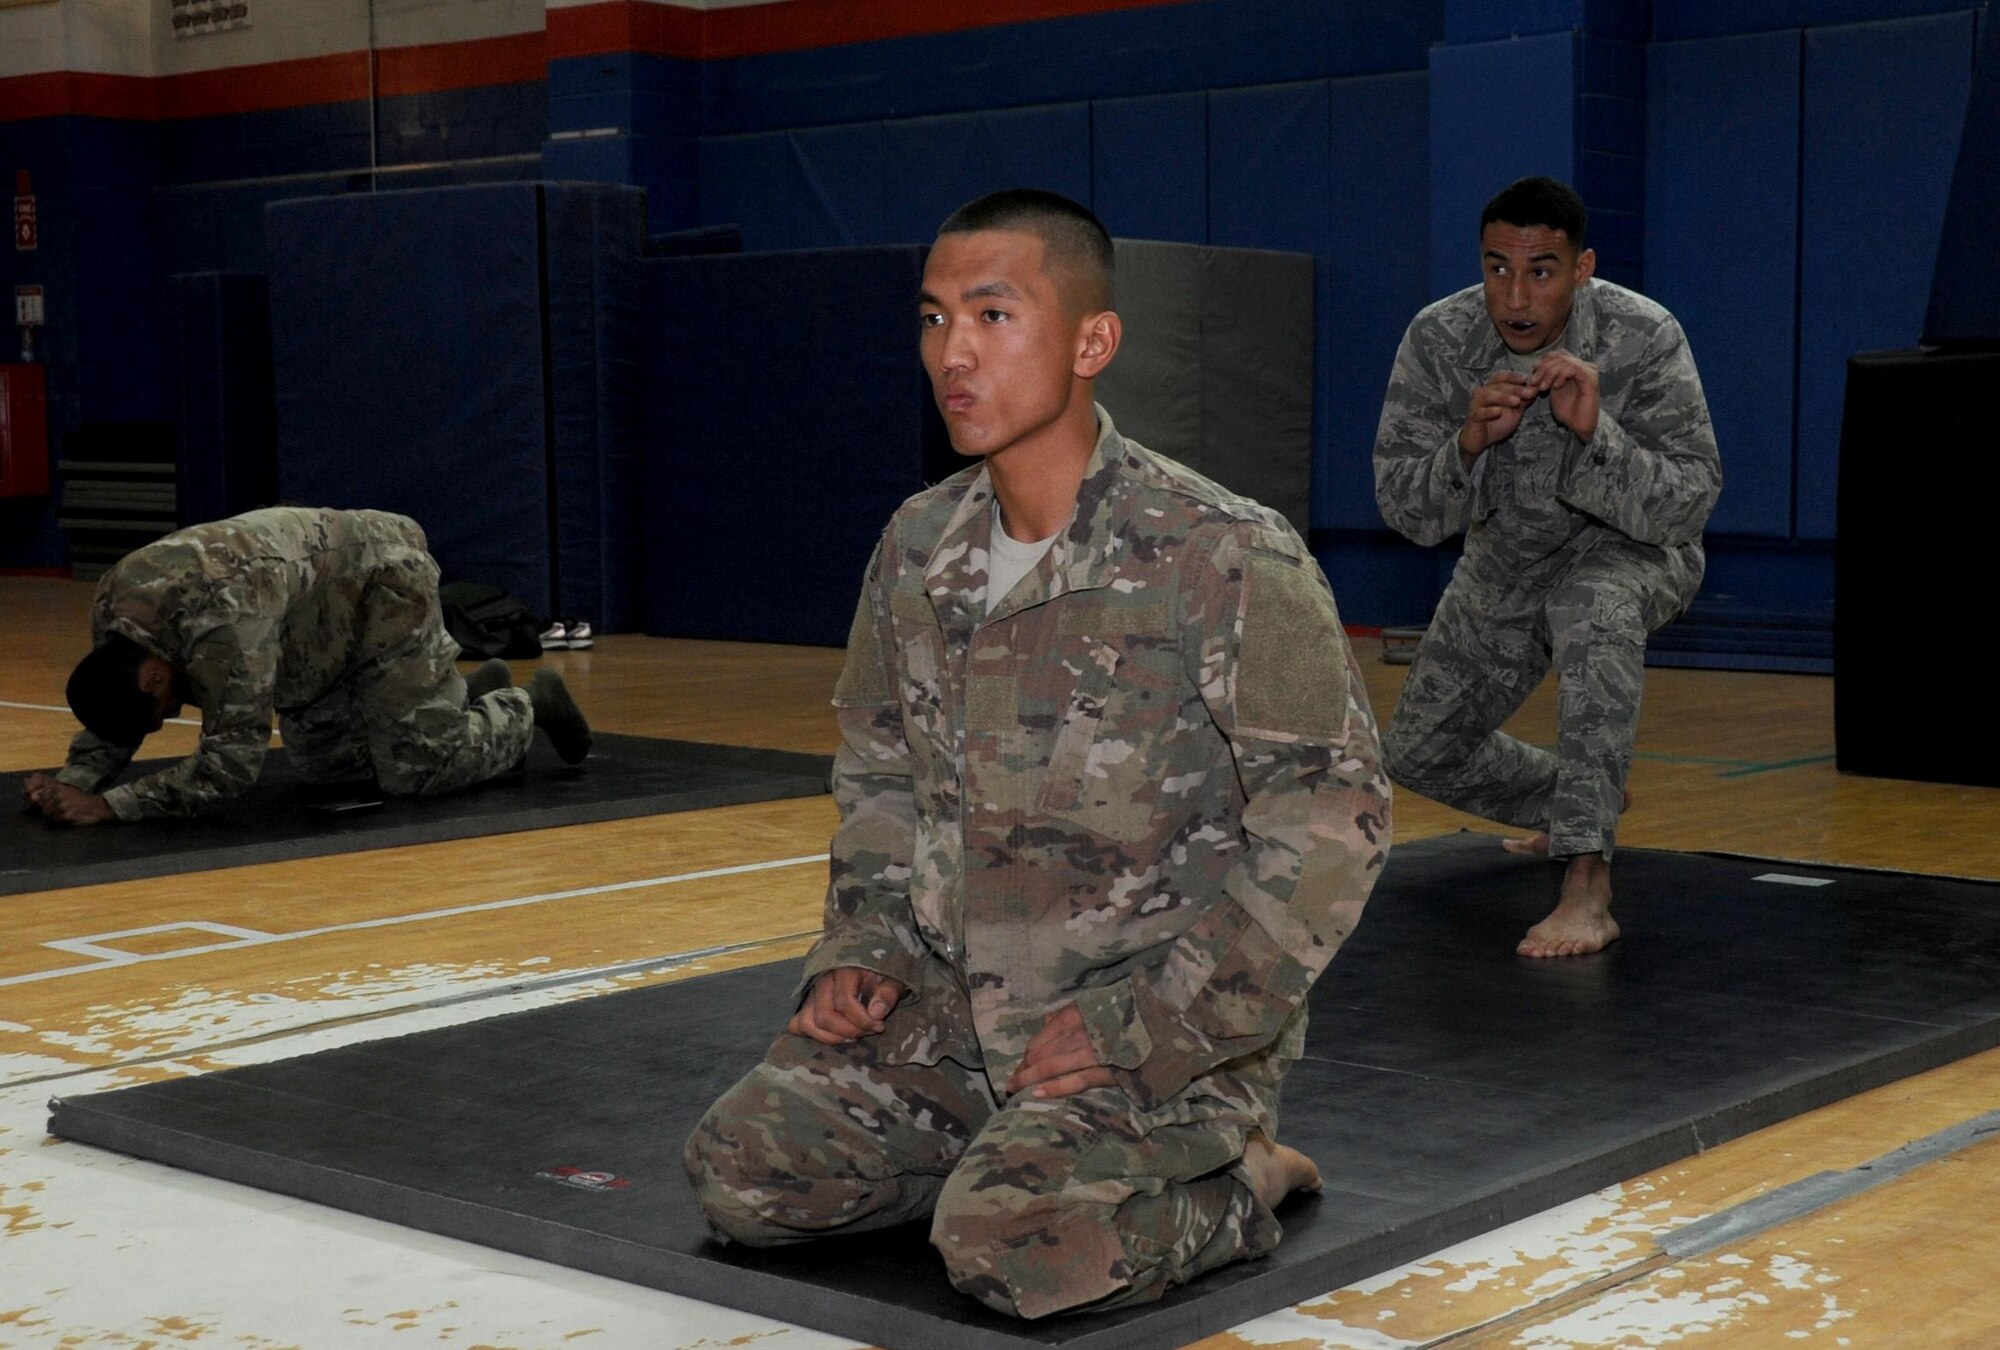 Pfc. Pham Viet, Delta 144th Air Defense Artillery wheel mechanic, left, and Senior Airman Dominic Rivera, 386th Expeditionary Maintenance Squadron craftsman, right, stretch before a fight during an Army combatives tournament at an undisclosed location in Southwest Asia January 22, 2017. Viet and Rivera both trained daily together to prepare themselves for the mixed martial arts competition. (U.S. Air Force photo/Tech. Sgt. Kenneth McCann)